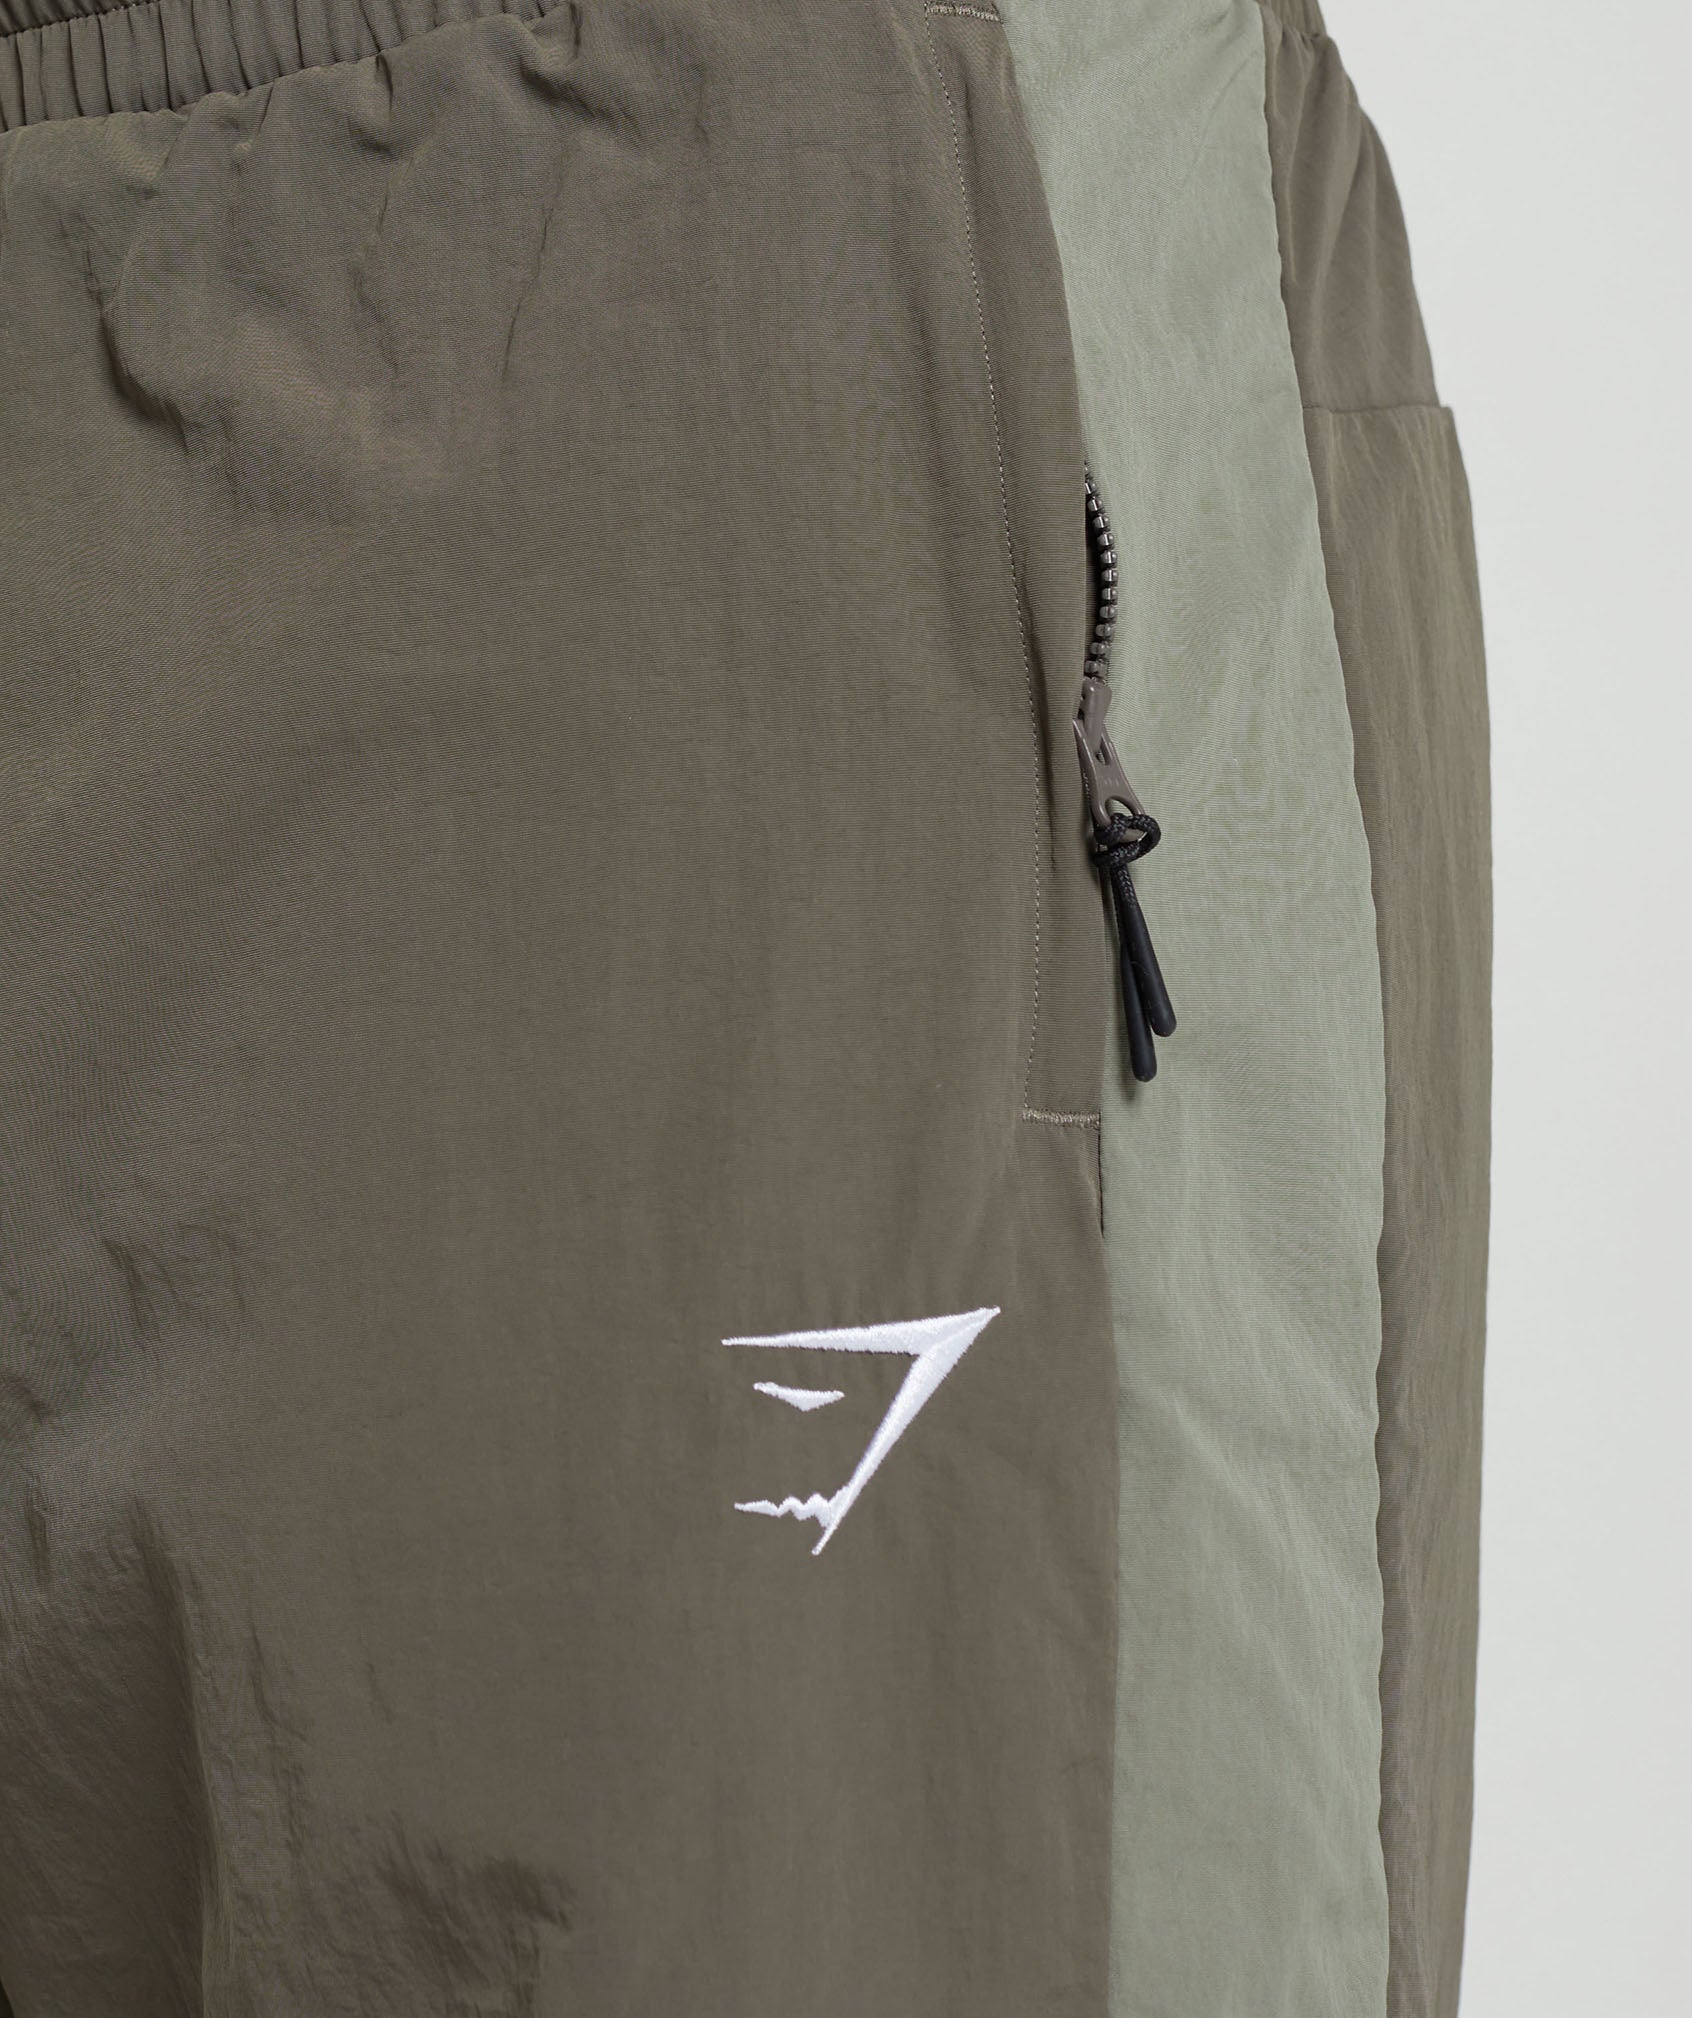 Retro Track Pants in Brown - view 5